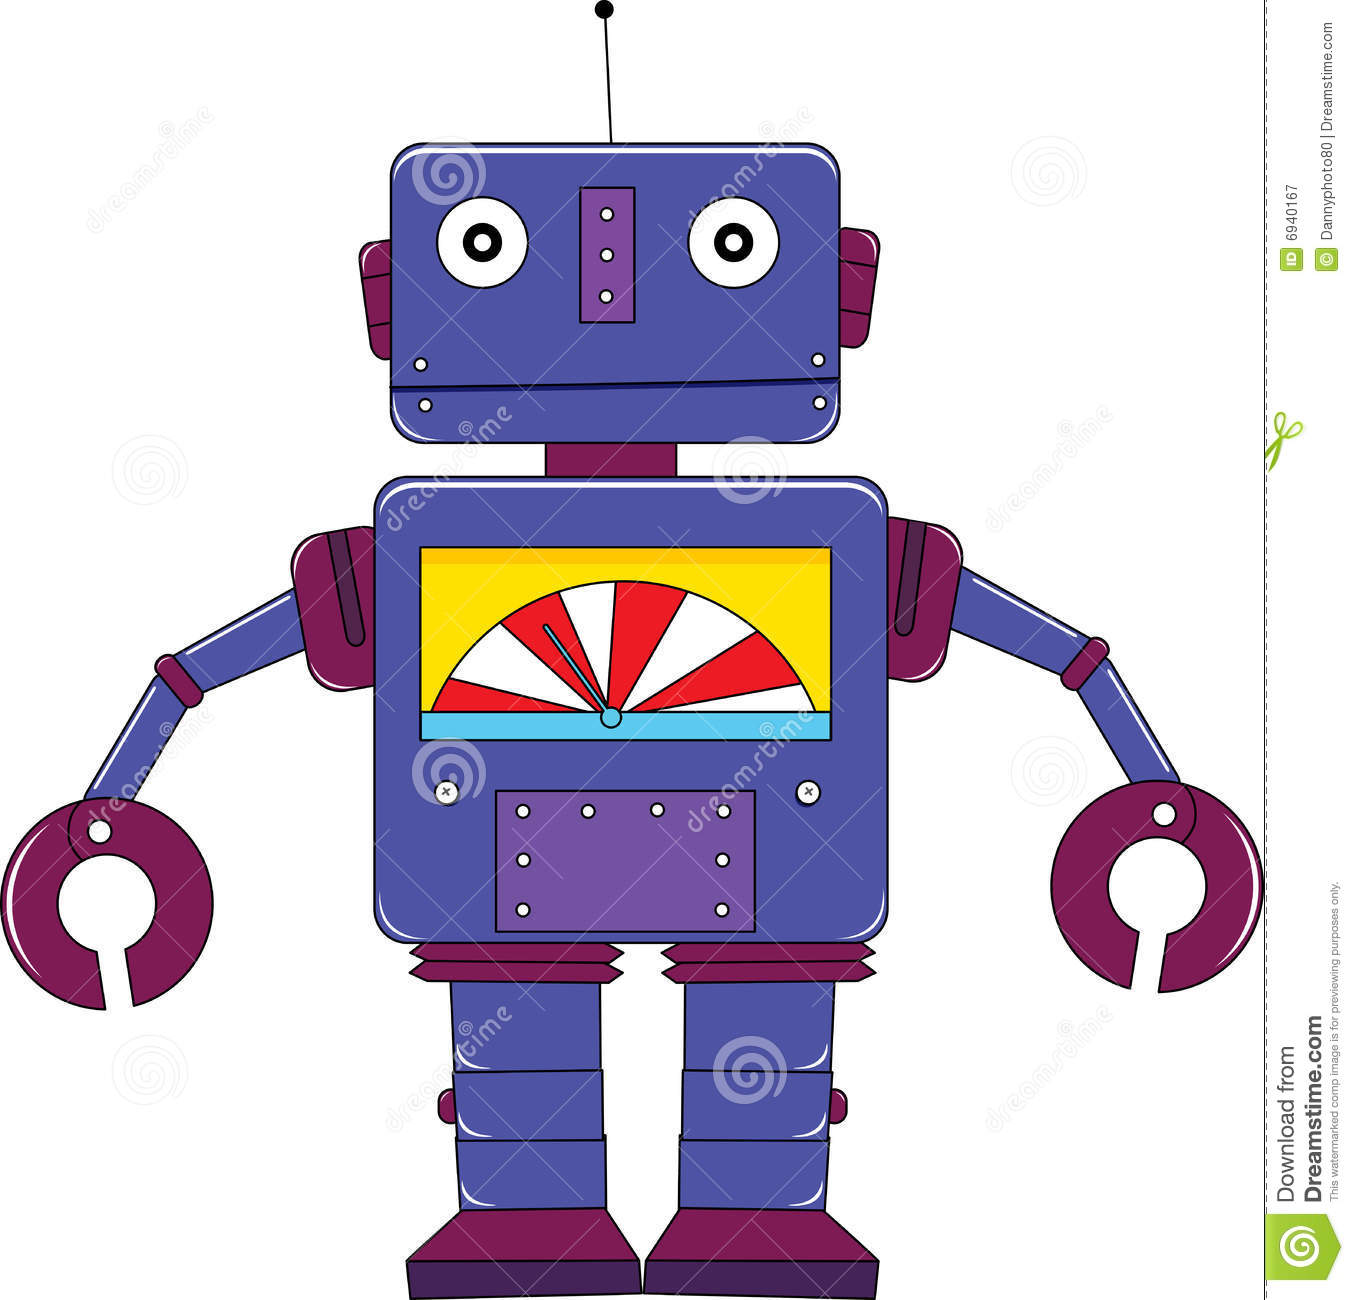 Robot Royalty Free Stock Photography   Image  6940167